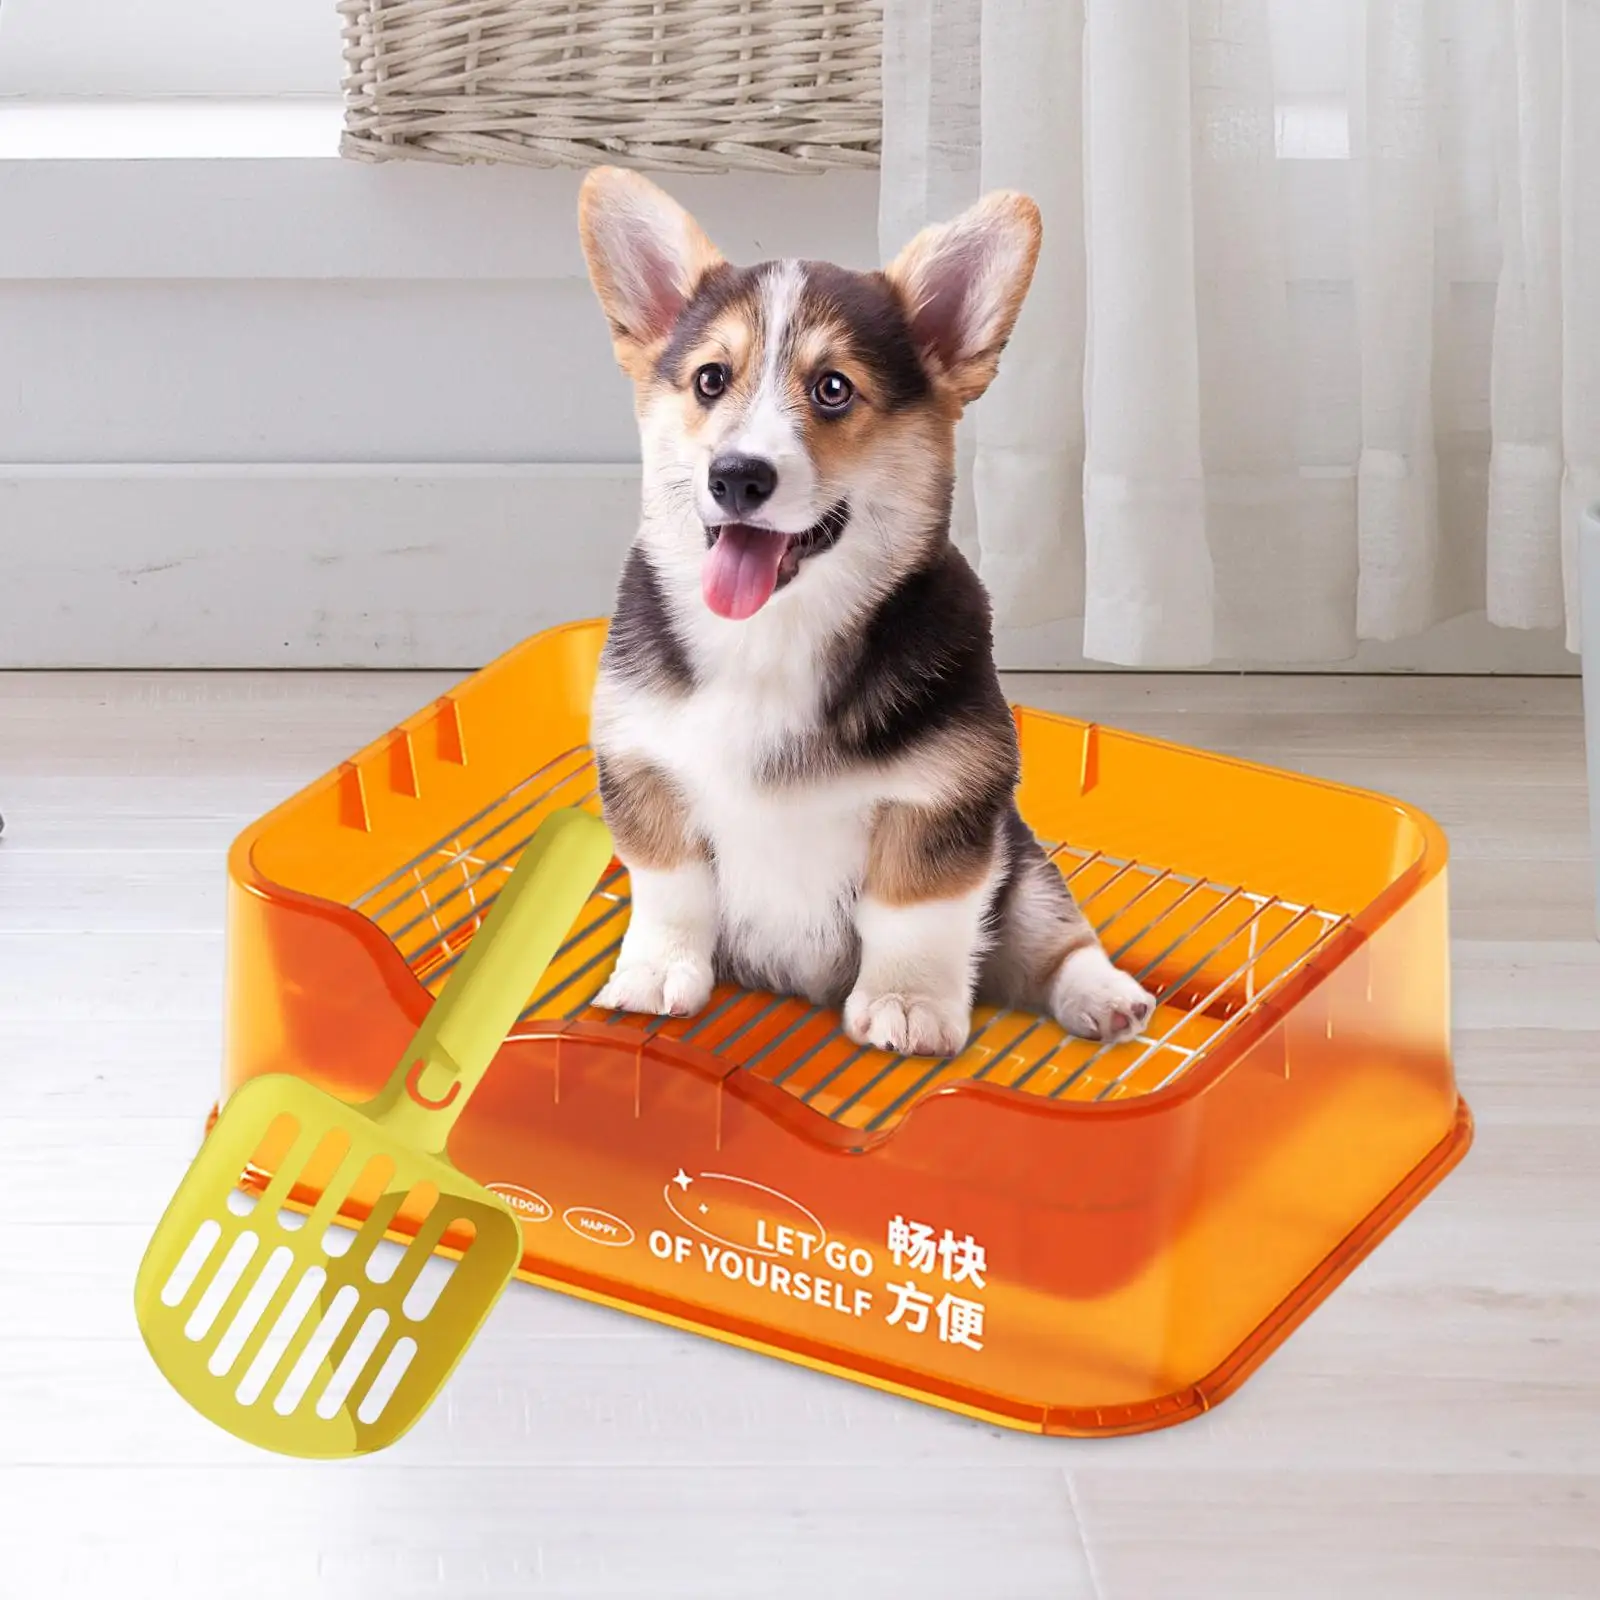 Dog Toilet Pets Supplies with Scooper Bedpan Sand Box Indoor Potty Tray Puppy Potty Pan Trainer Corner Puppy Litter Box